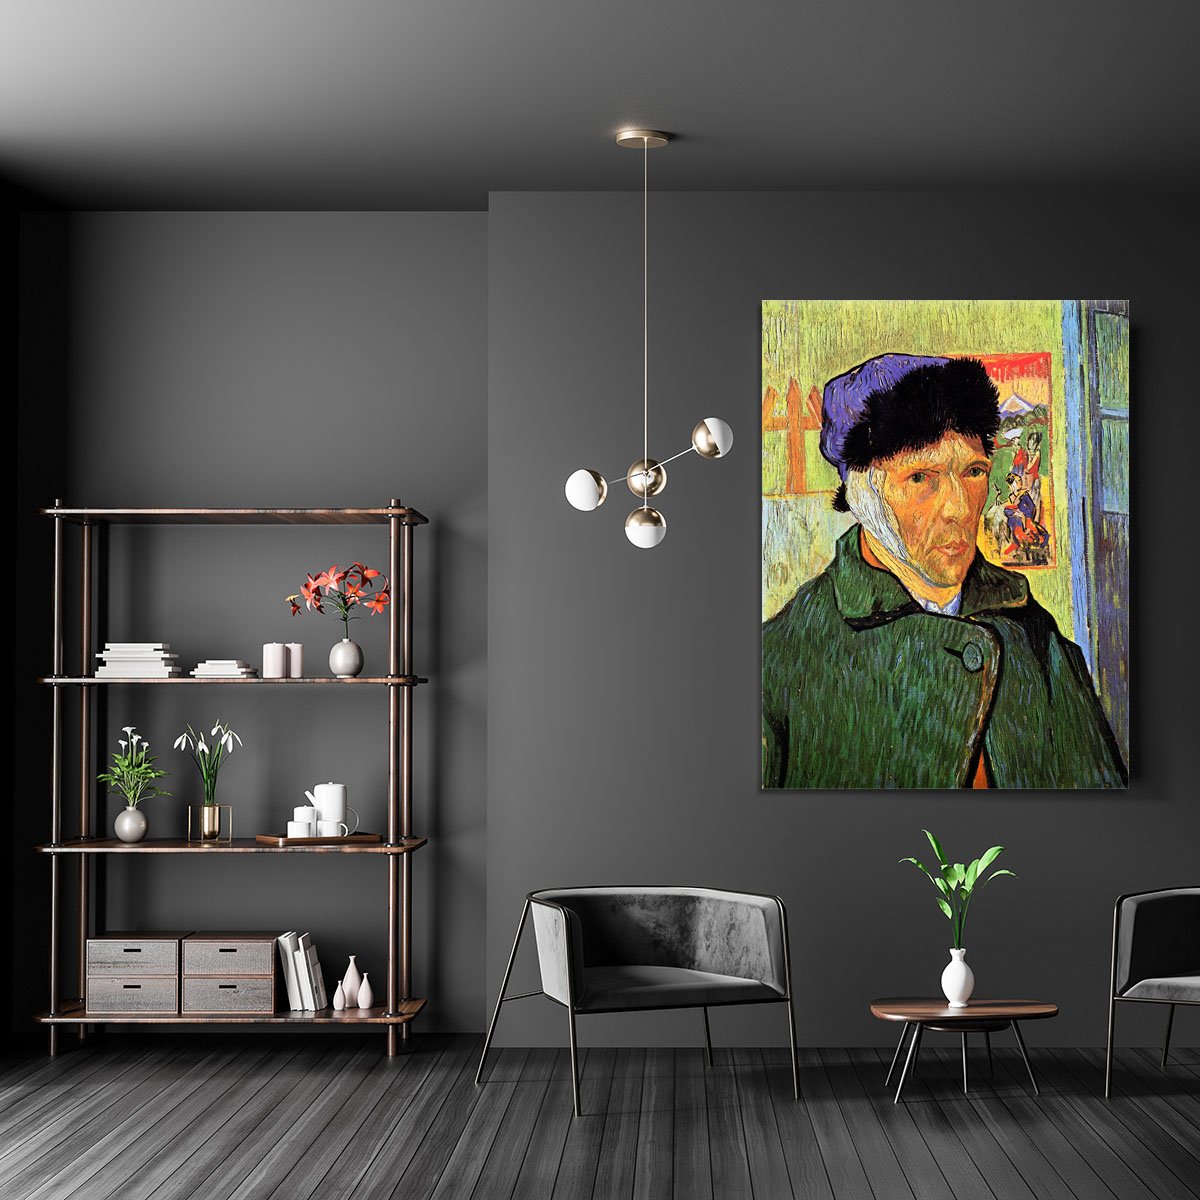 Self-Portrait 11 by Van Gogh Canvas Print or Poster